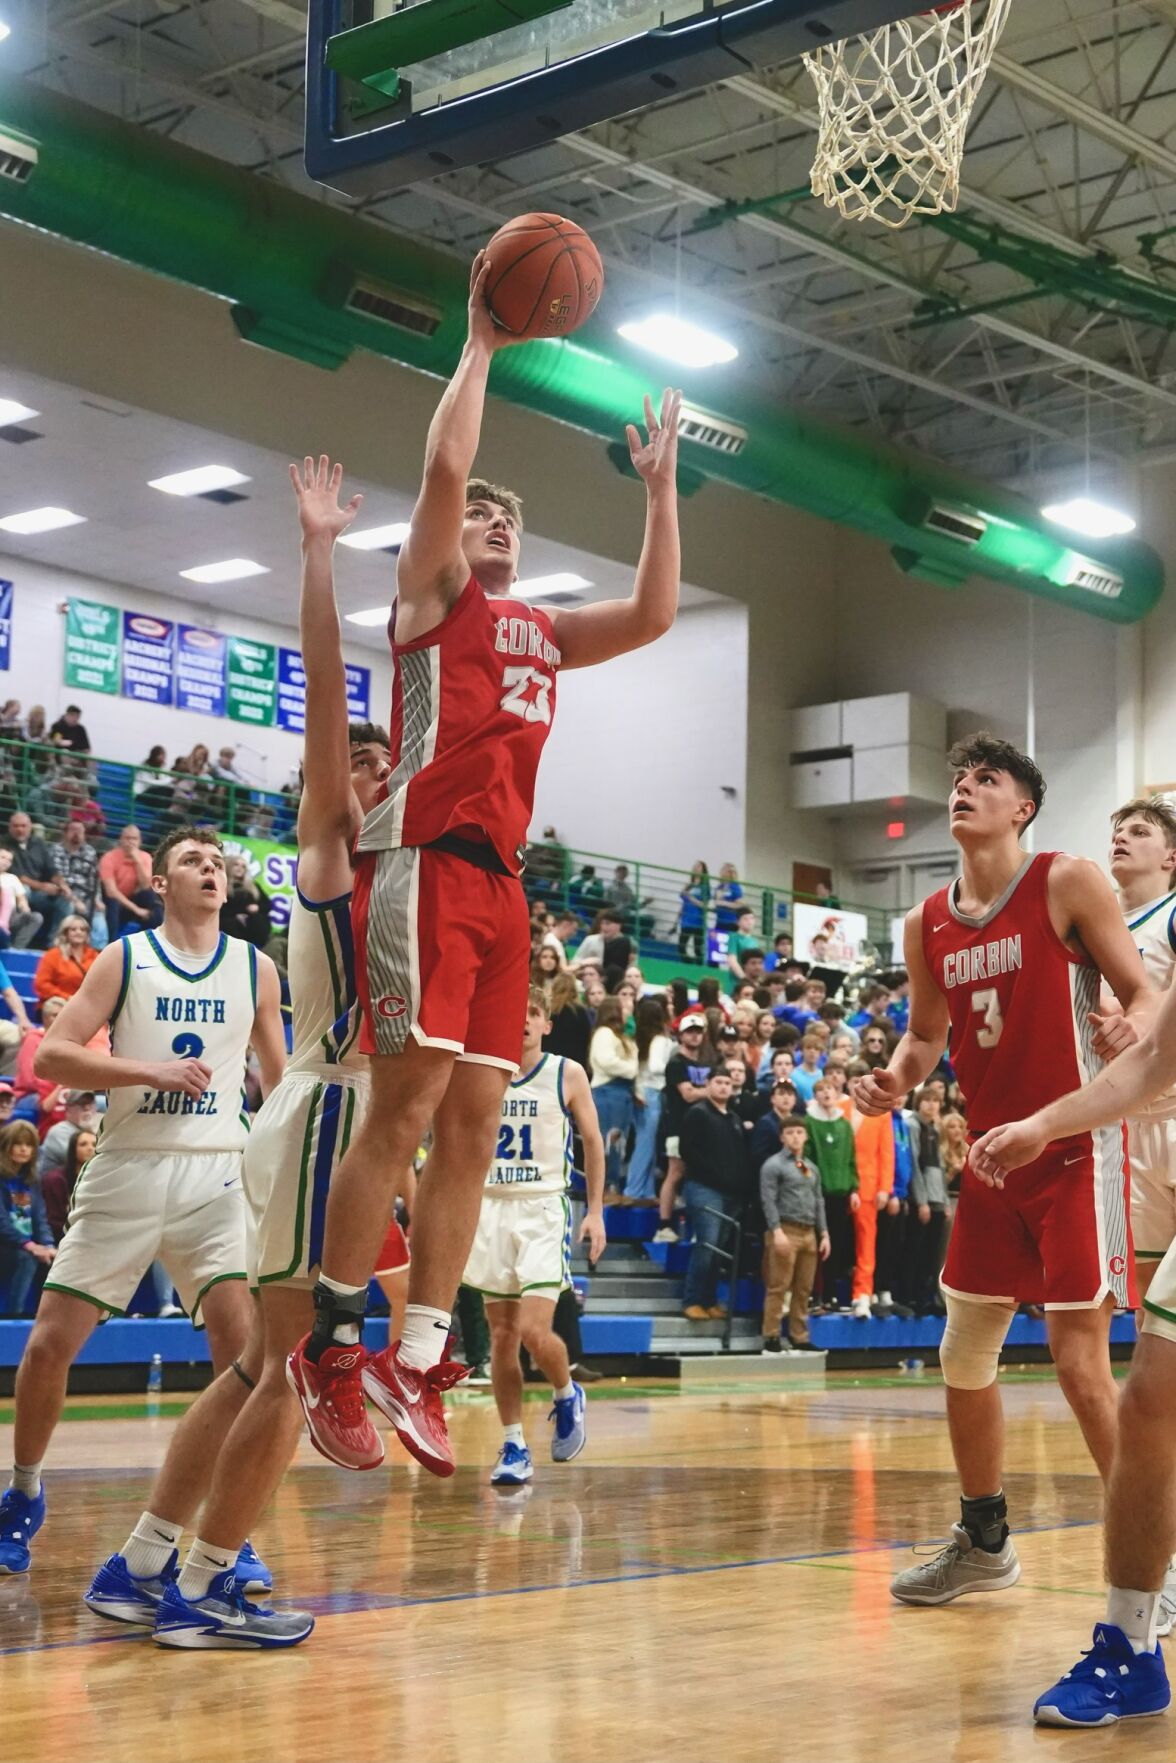 North Laurel Jaguars top Corbin Redhounds 75-71 in Double Overtime Thriller, Securing 11th Consecutive Victory